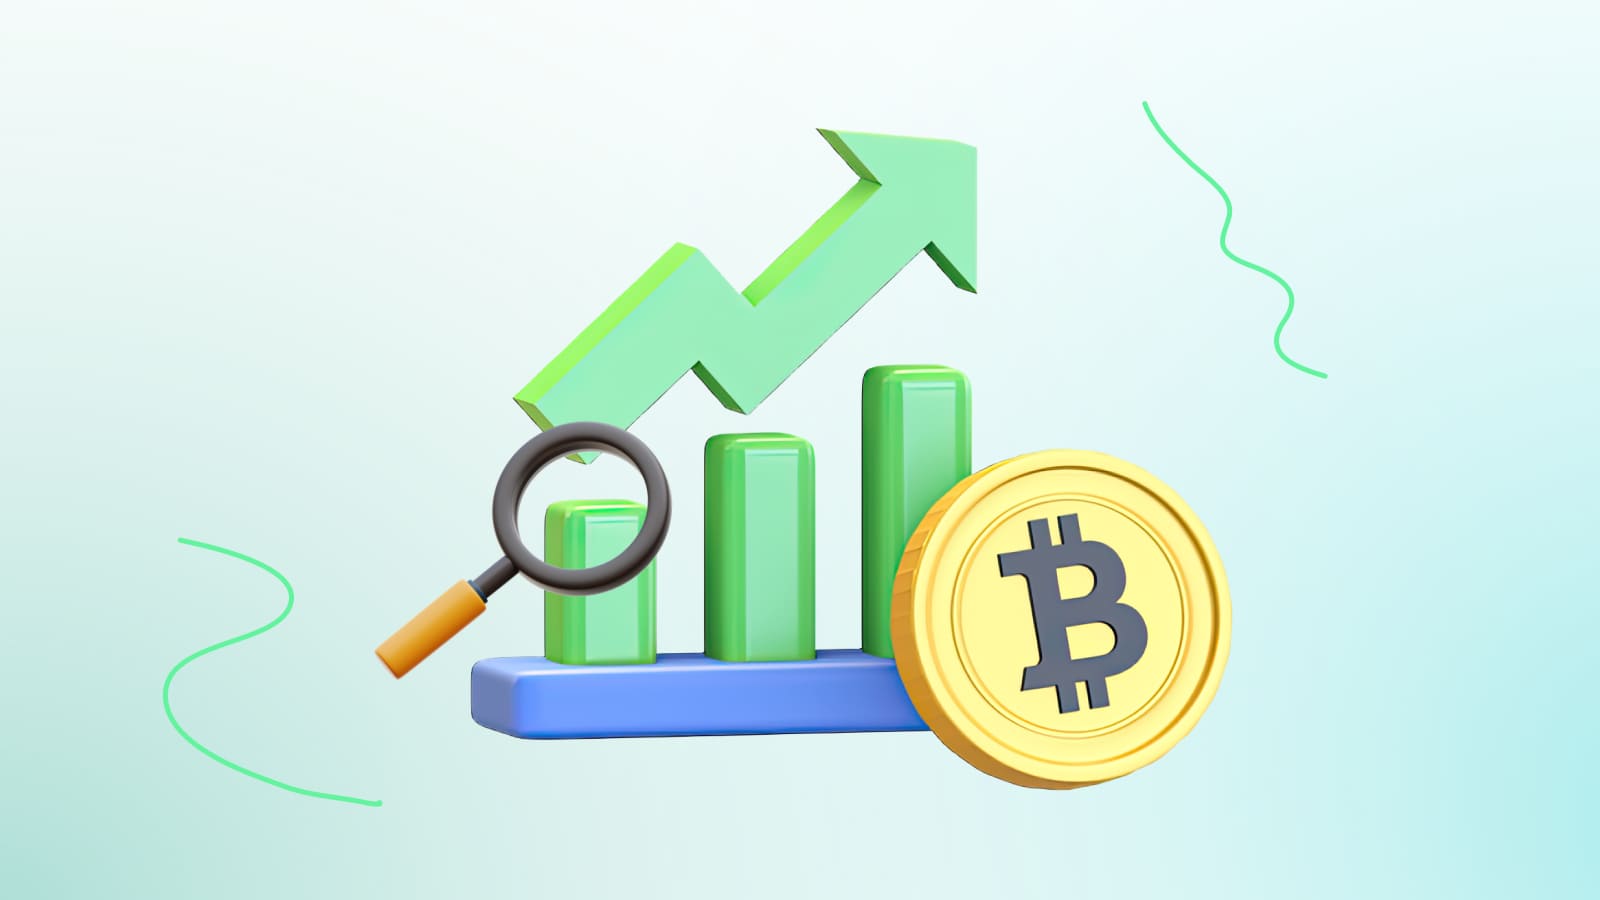 Cryptocurrency adoption is evaluated based on per capita purchasing power parity (PPP).